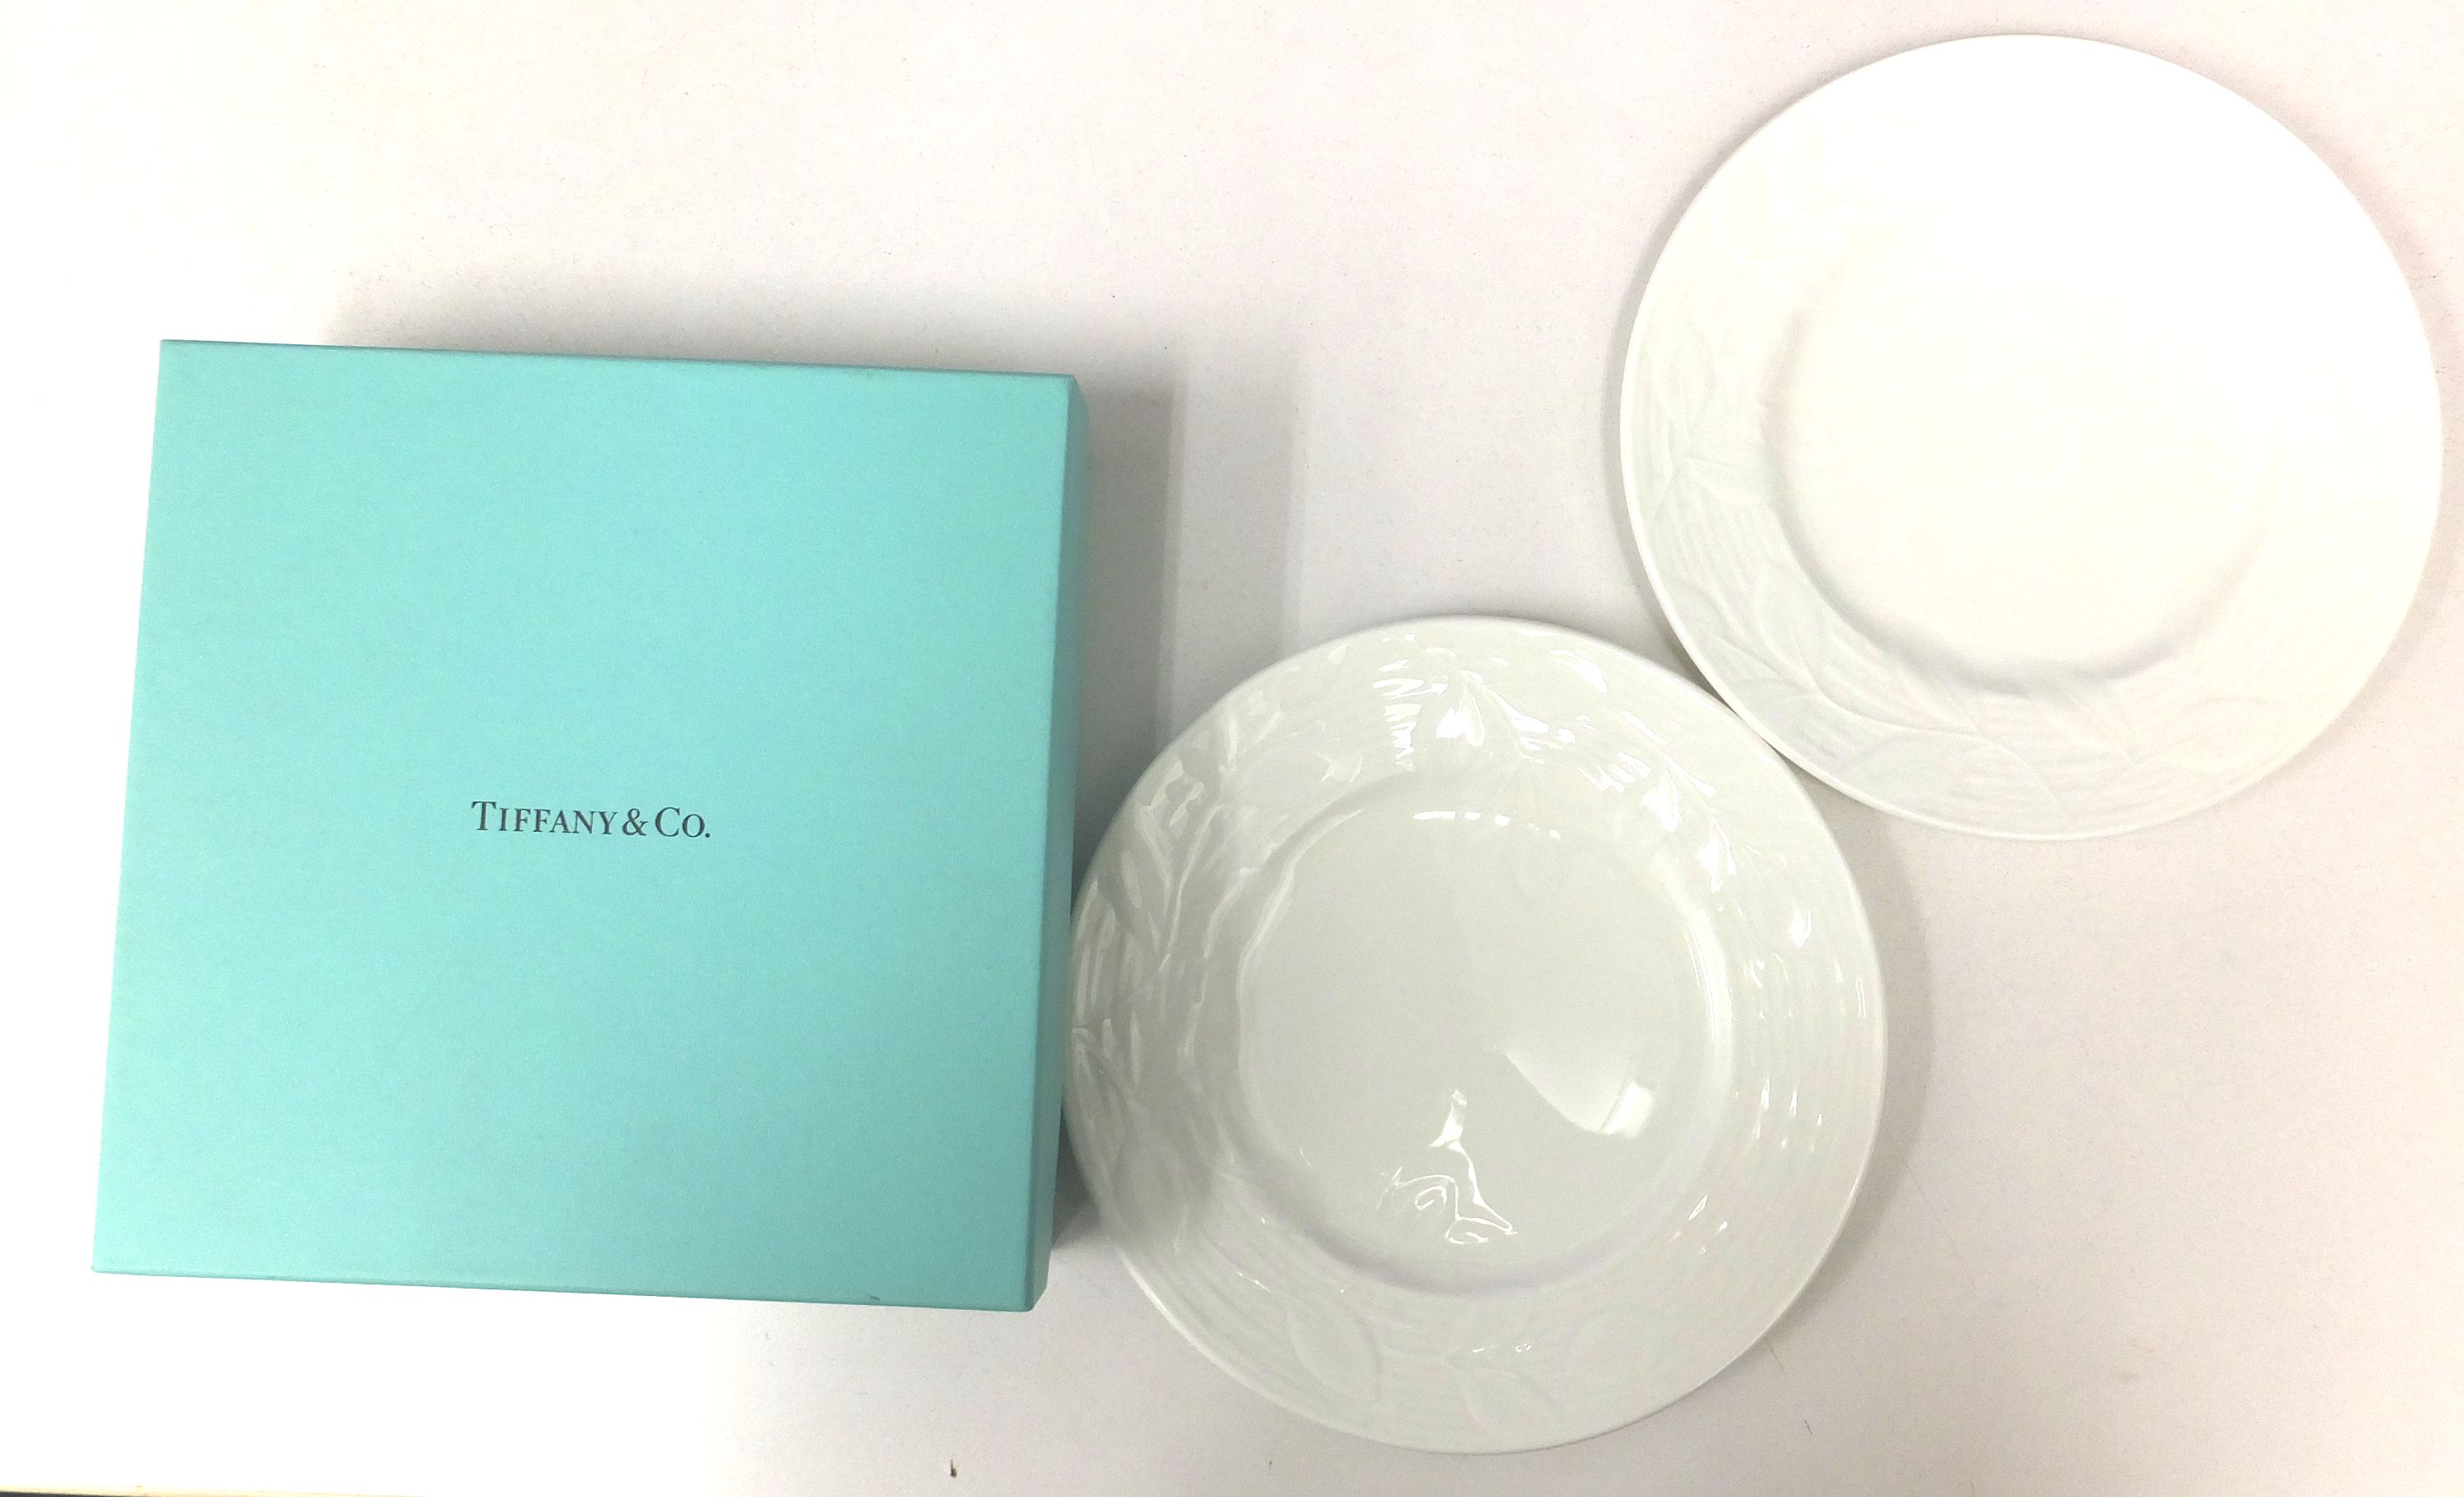 Tiffany & Co.の小皿 プレートセットをお買取りしました。